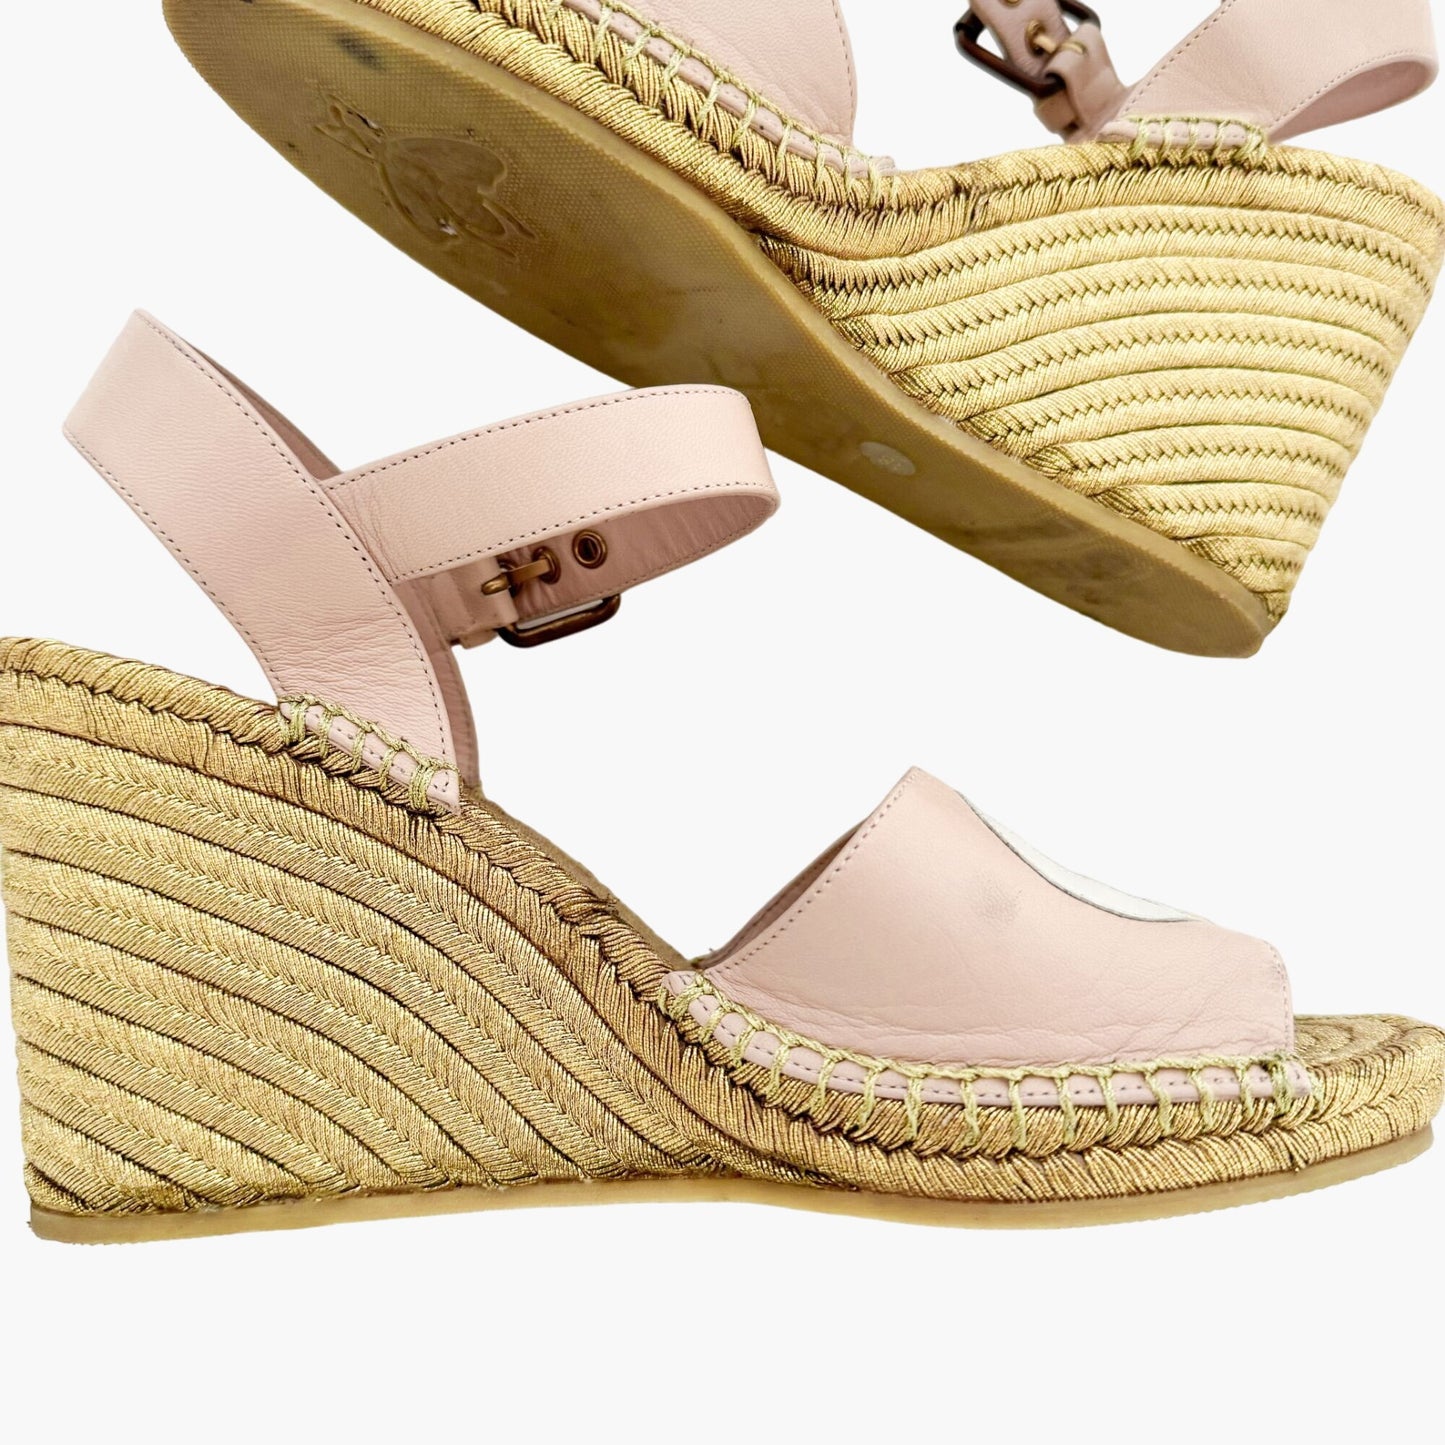 Gucci Flor GG Espadrille Wedge Sandals in Pink & Gold Leather Size 39.5